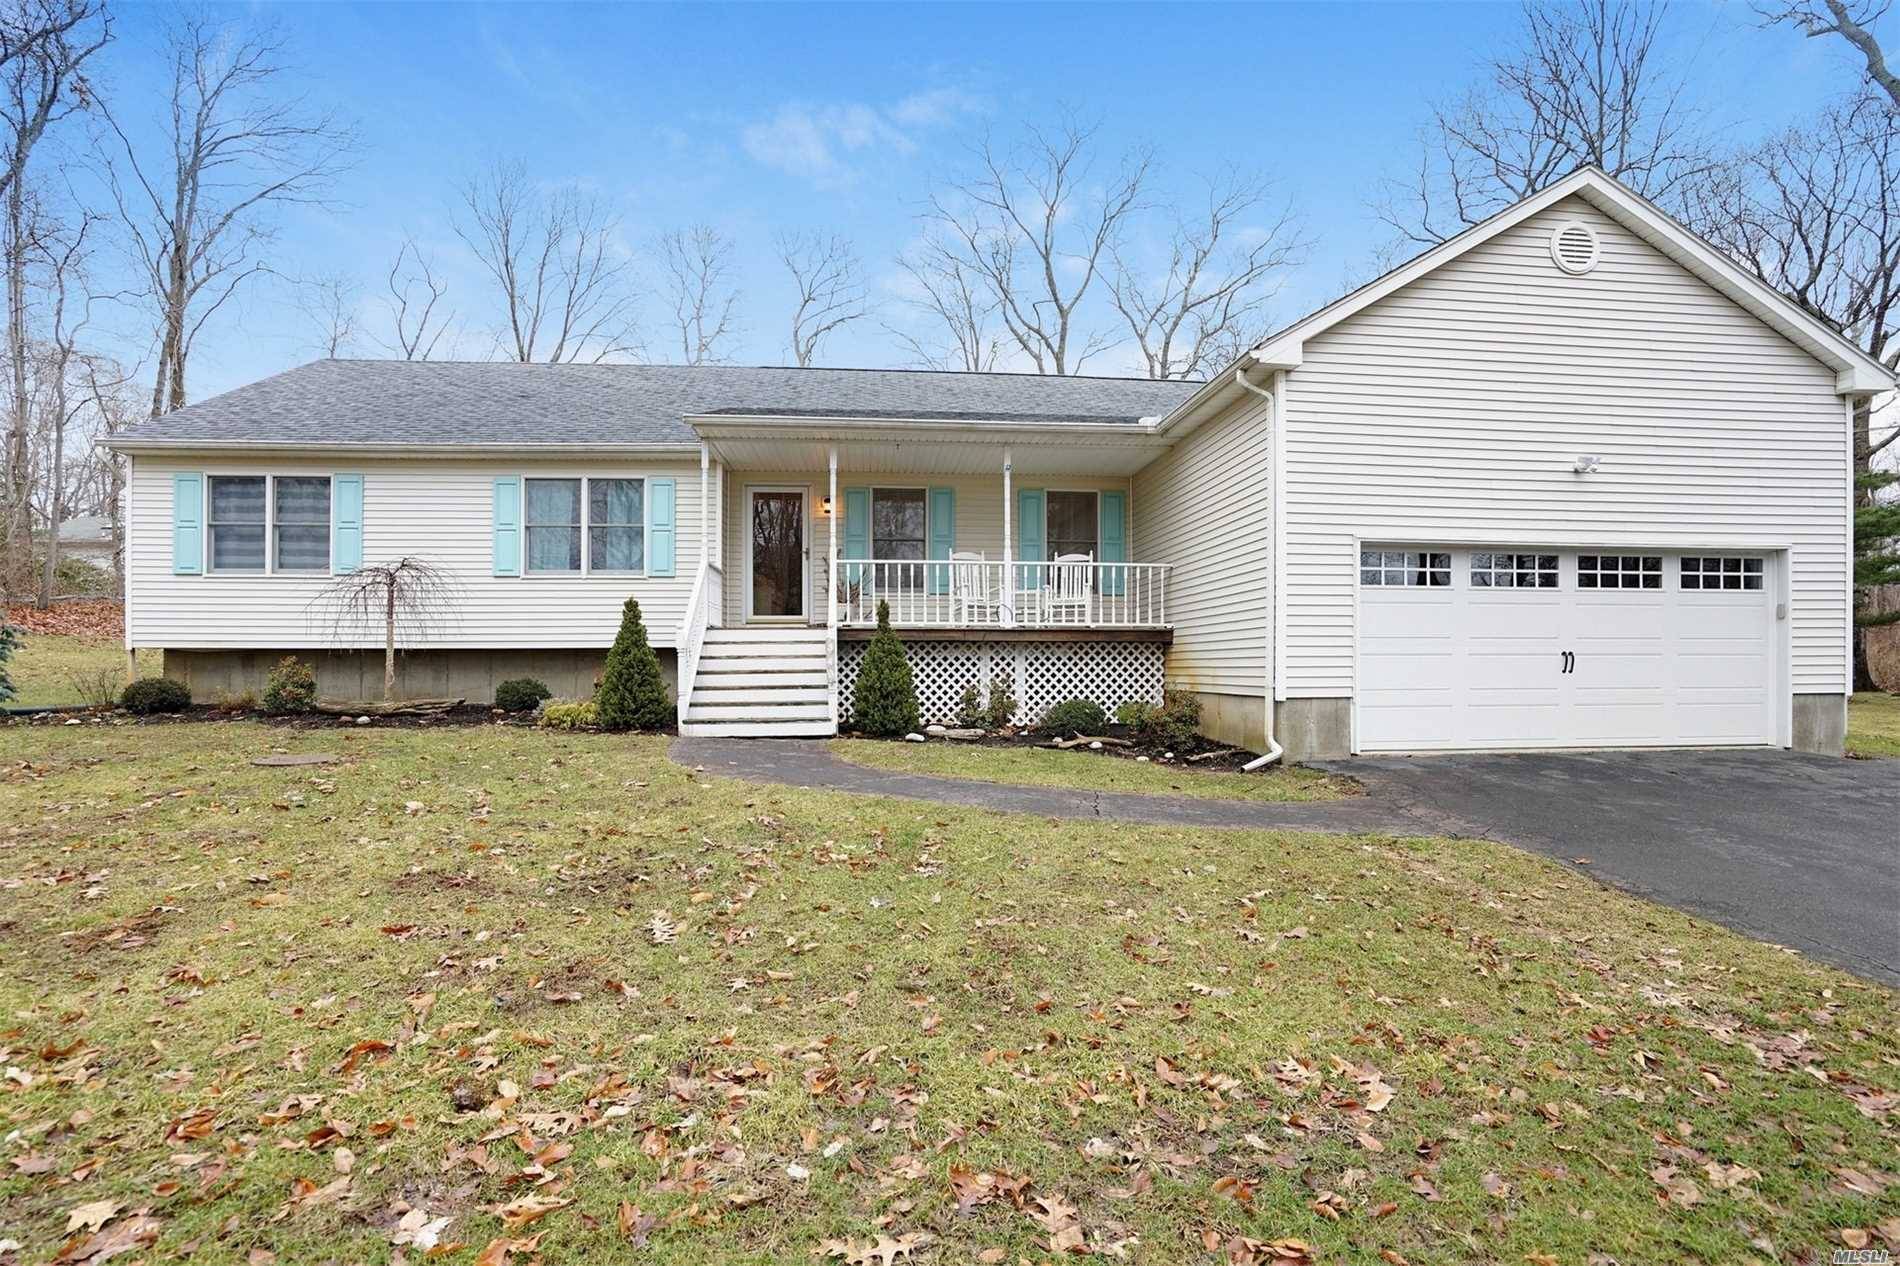 Newly Renovated 3 Bedroom, 2 Bath Home With Family Room, Deck And A Memorable Community Long Island Sound Beach Less Than A Half Mile Away.